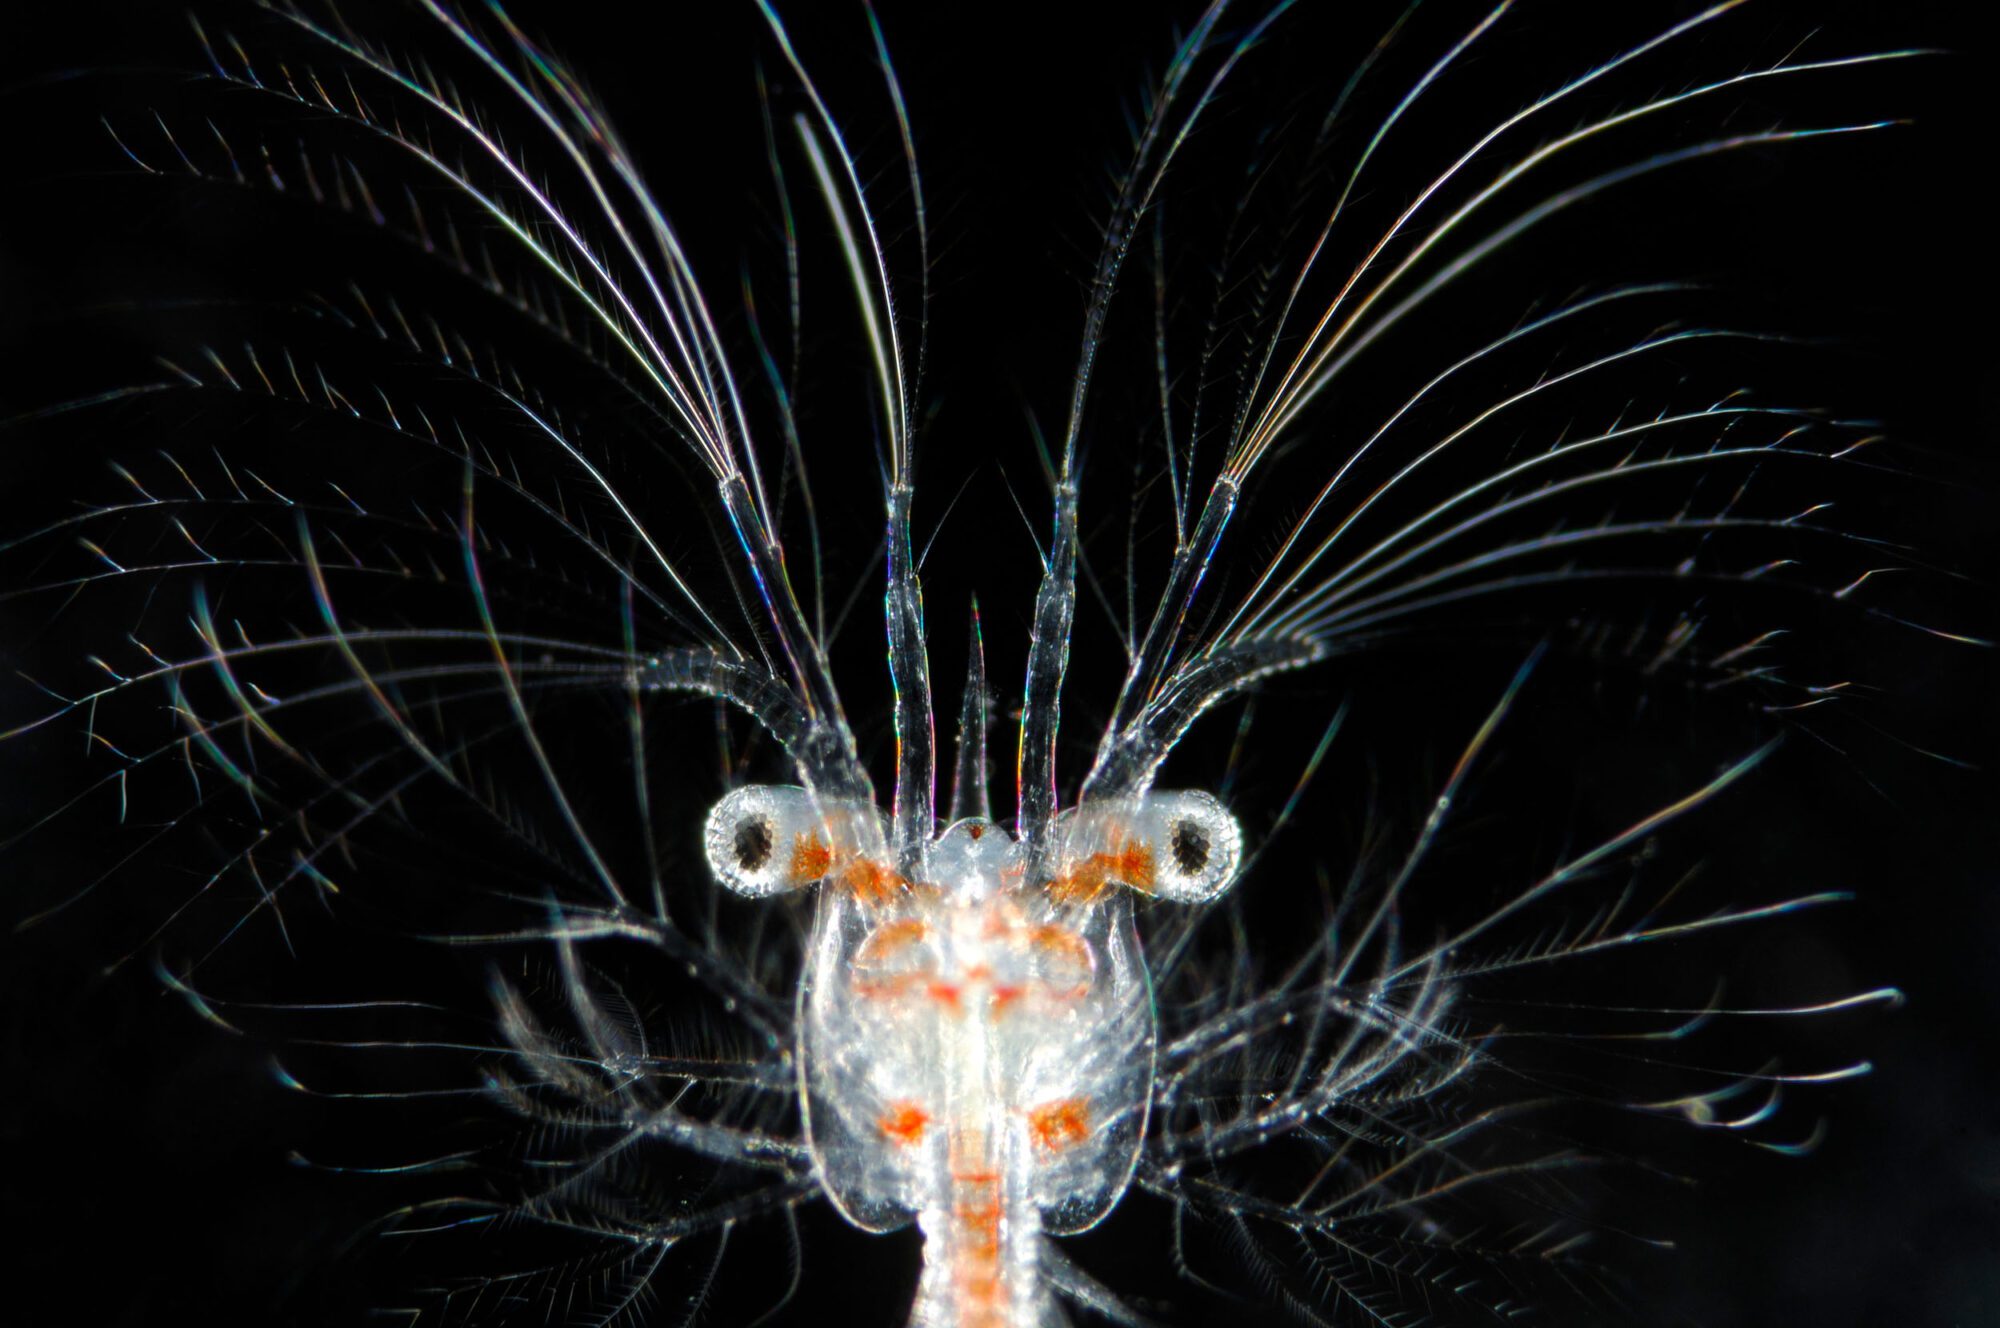 A creature with many tendrils like whiskers coming out of its face, which is orange and white with two googly eyes sticking out either side and a thin "neck", against pitch black